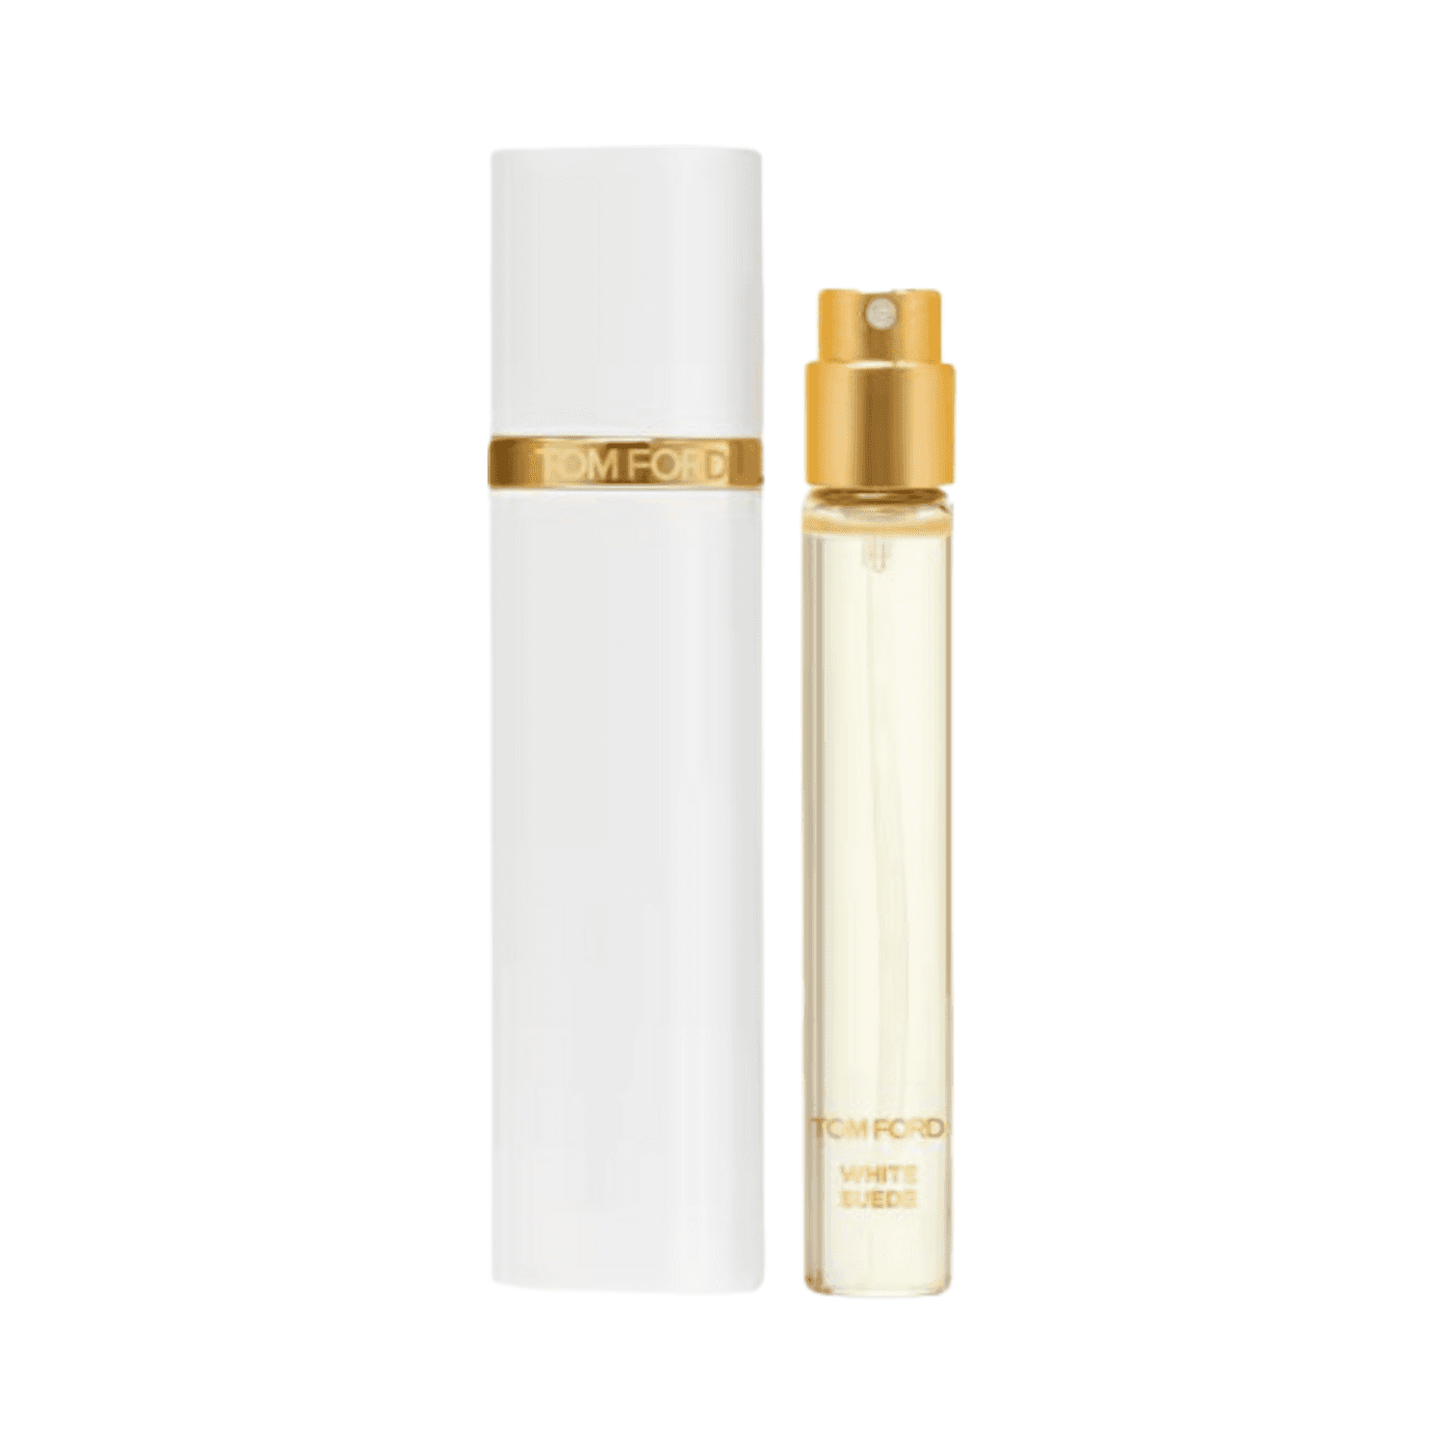 Tom Ford White Suede Atomizer